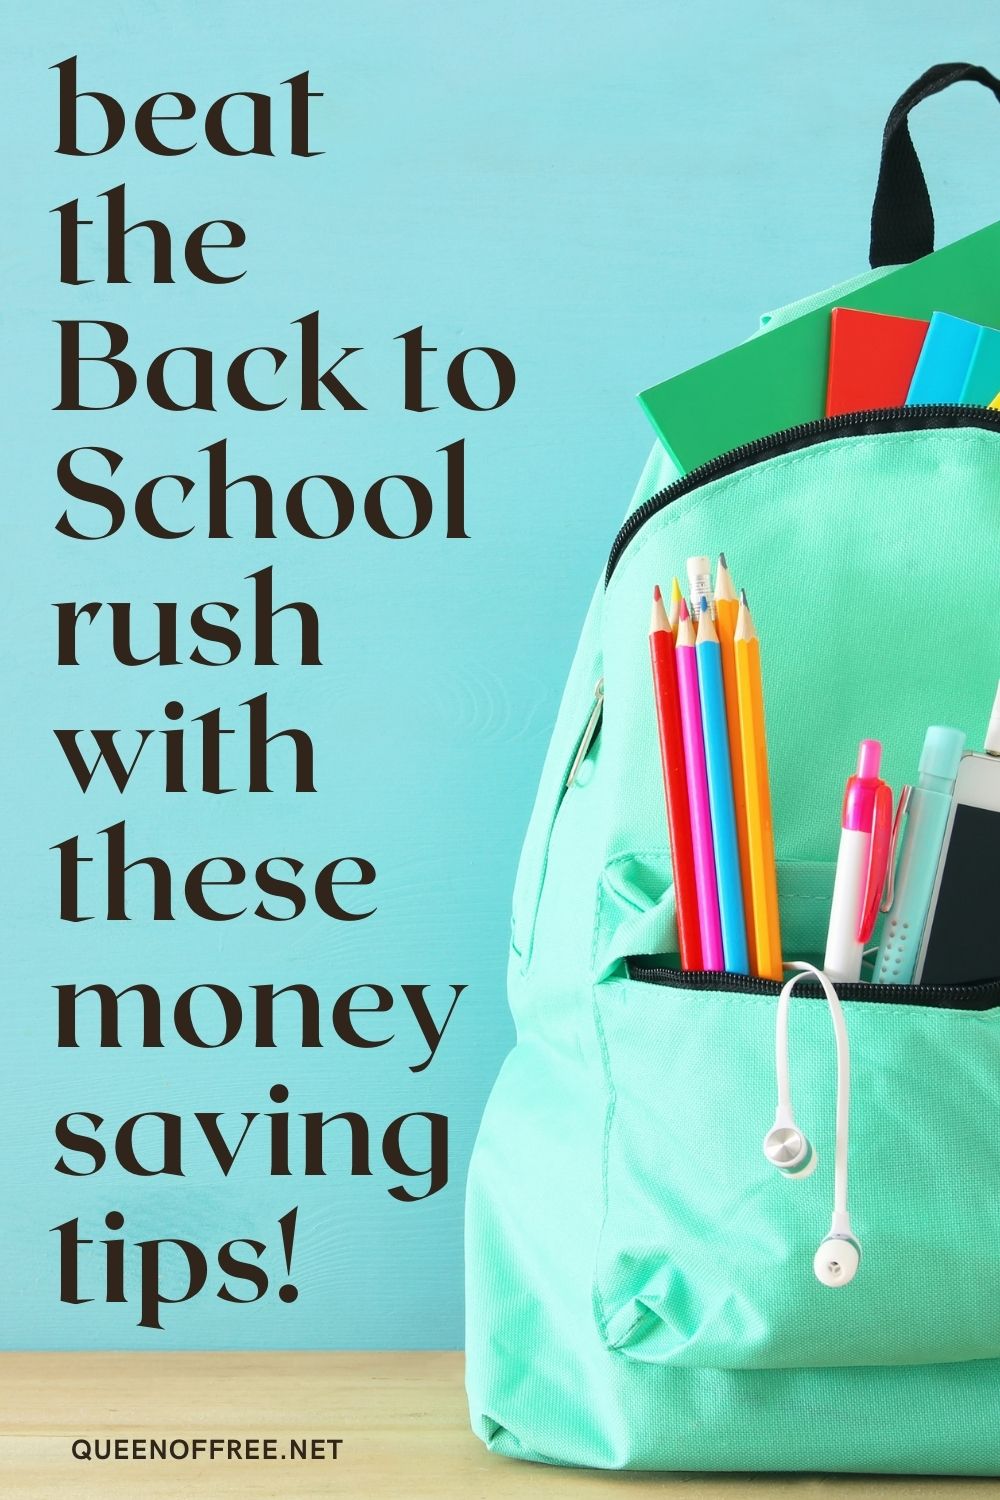 Beat the rush and overwhelm this year! These simple Back to School Shopping Hacks will help you stay organized and on budget. 